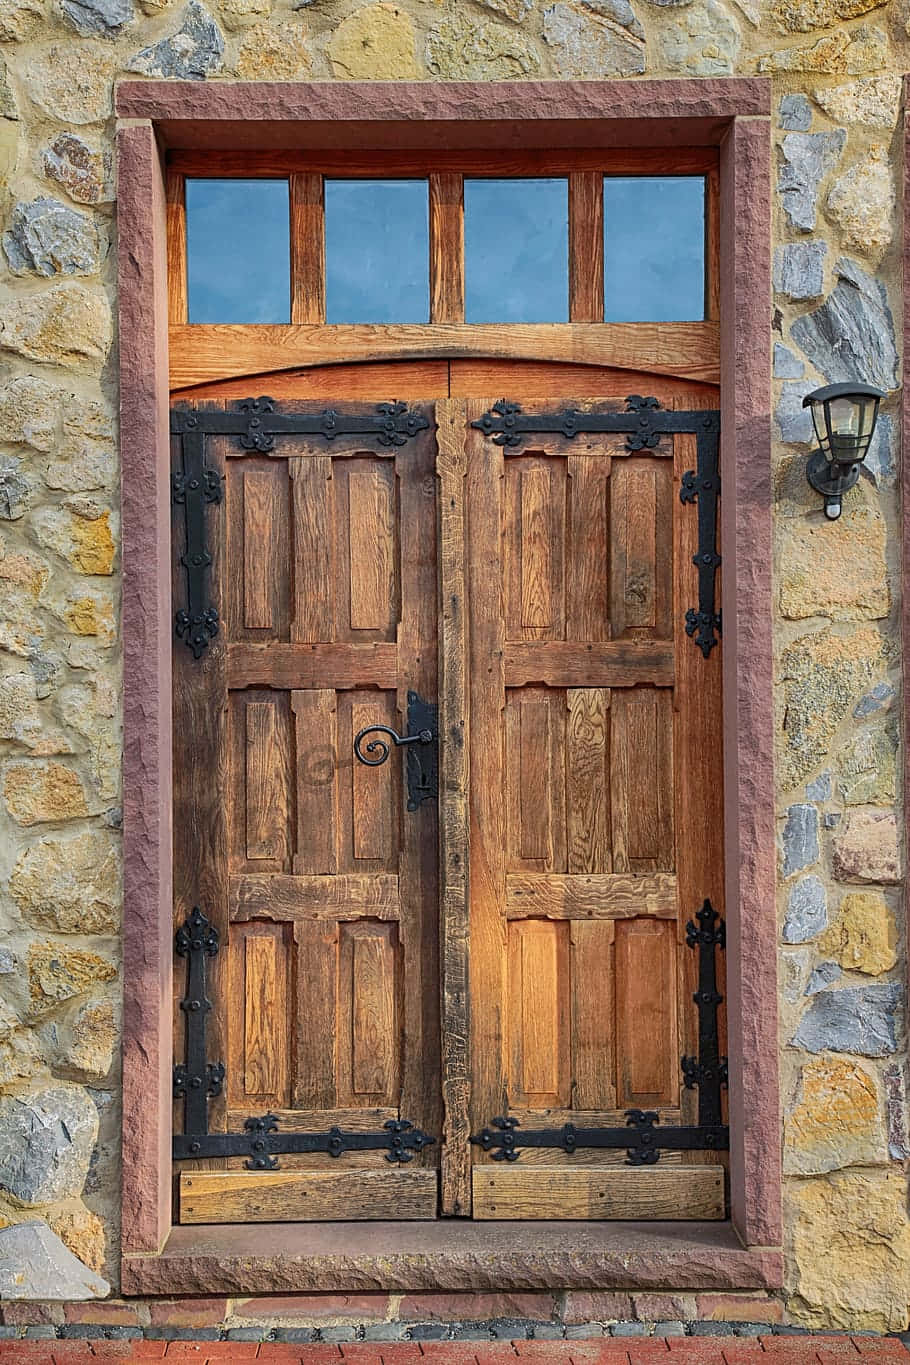 A Wooden Door With A Stone Wall